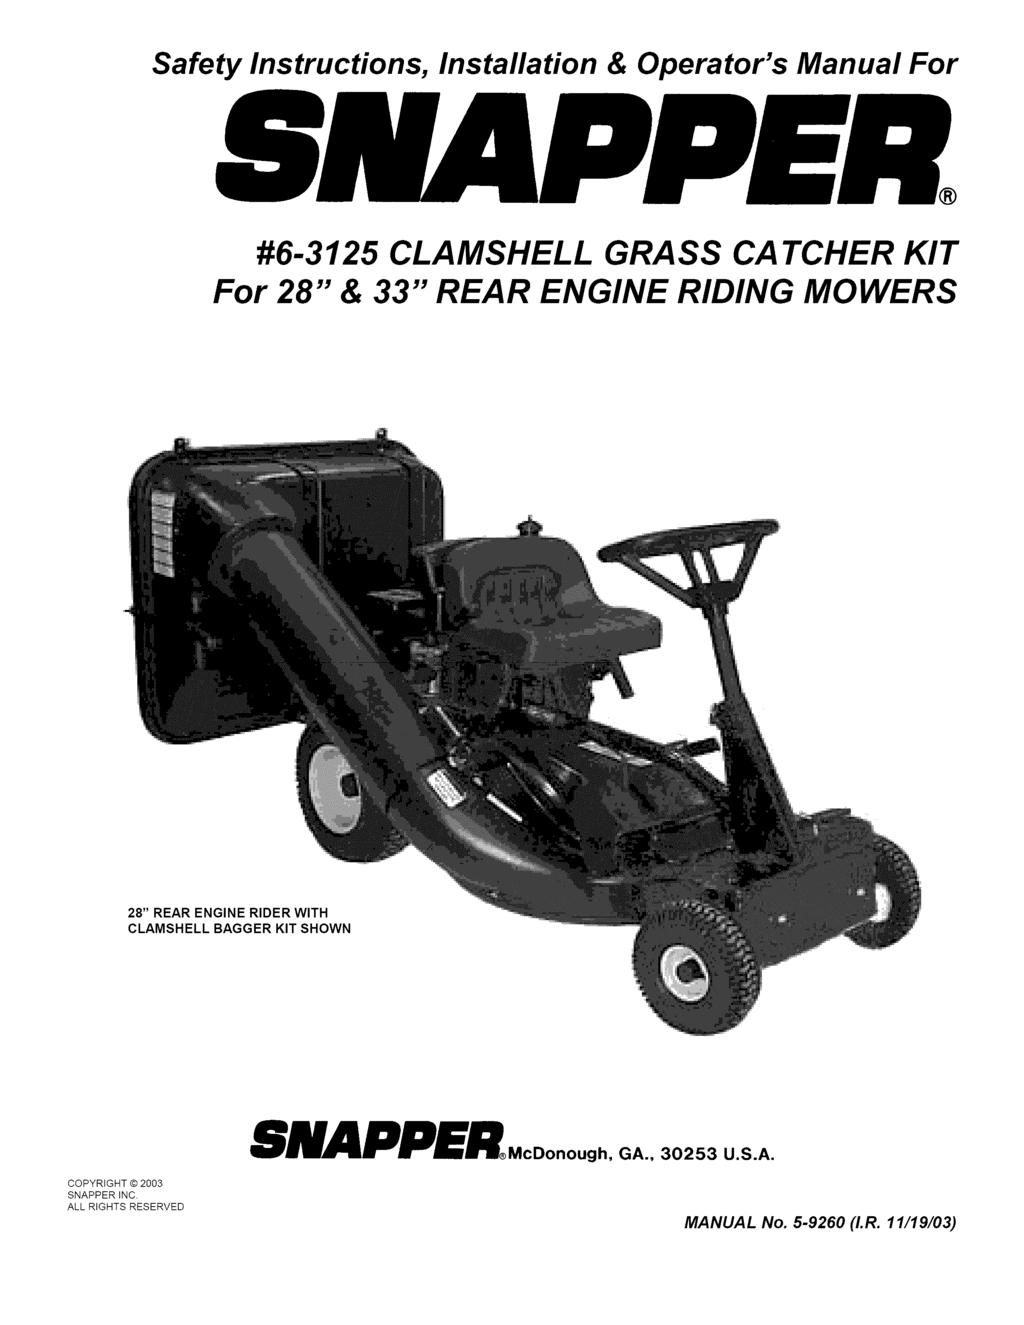 Safety Instructions, Installation & Operator's Manual For #6-3125 CLAMSHELL GRASS CA TCHER KIT For 28" & 33" REAR ENGINE RIDING MOWERS 28" REAR ENGINE